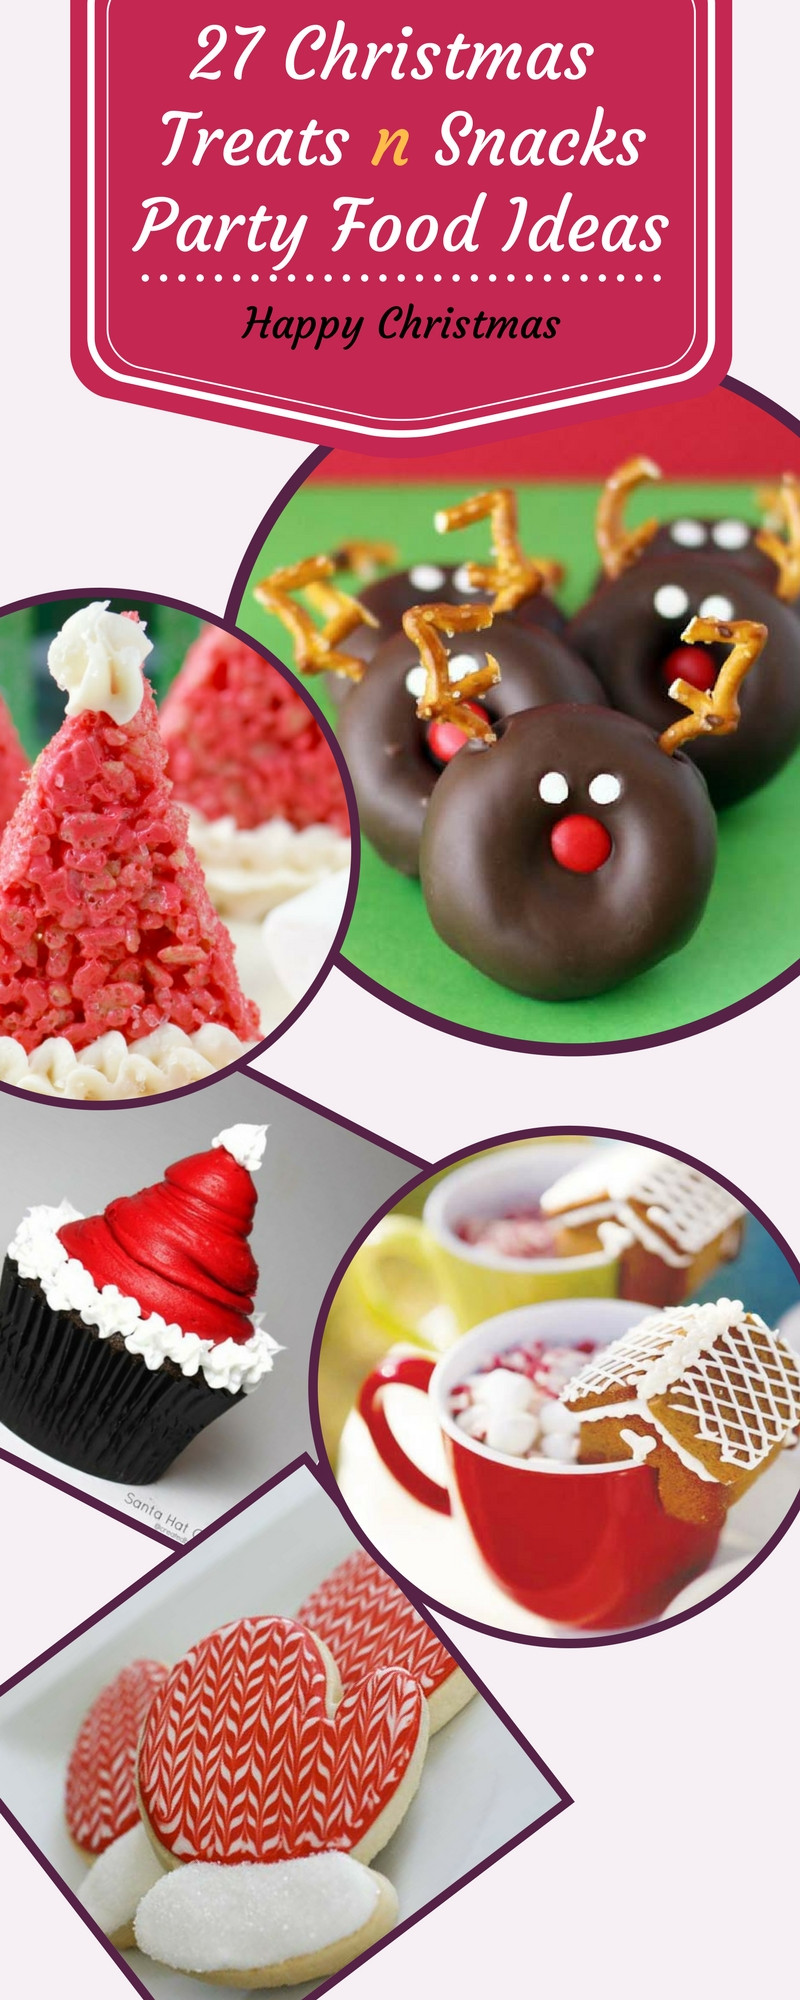 Holiday Party Snack Ideas
 27 Christmas Party Food Ideas Healthy Christmas Treats n